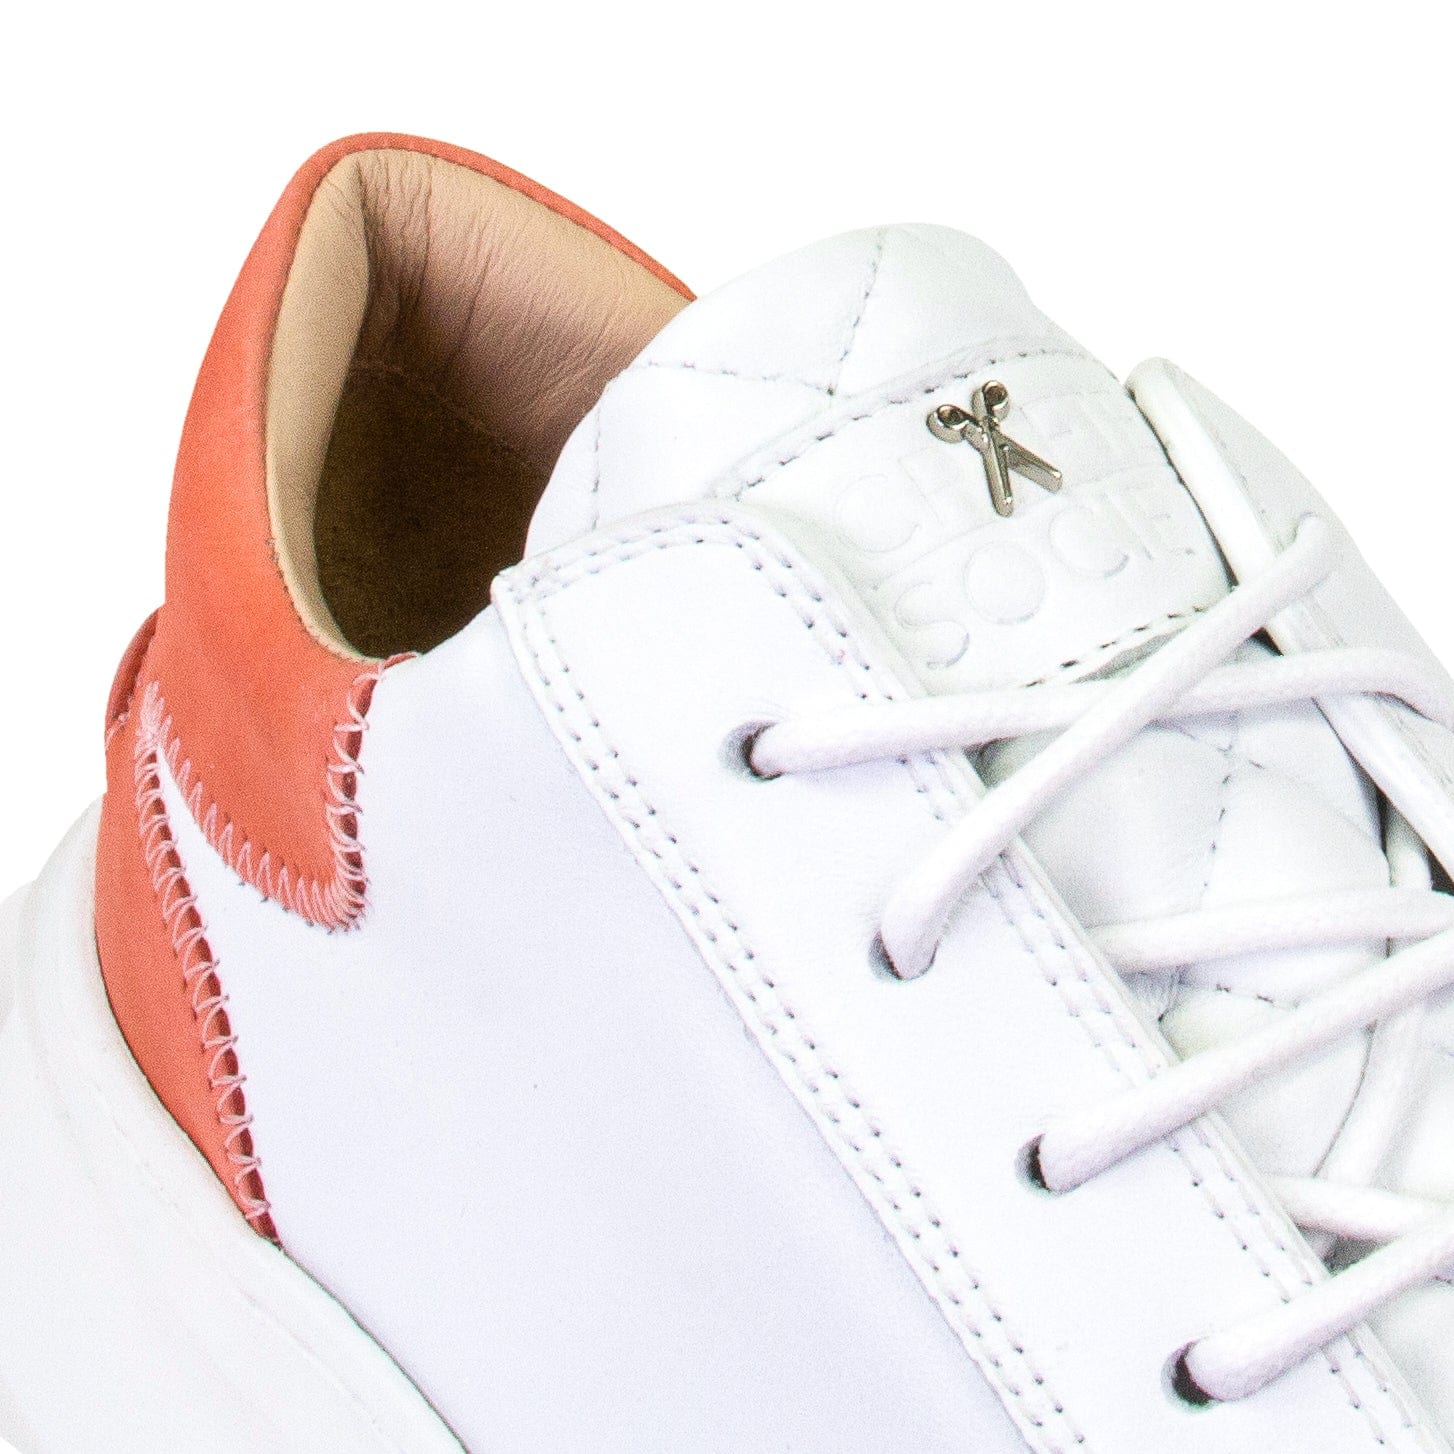 Matteo Low Top Sneaker | White & Rose Full Grain Leather | White Outsole | Made in Italy